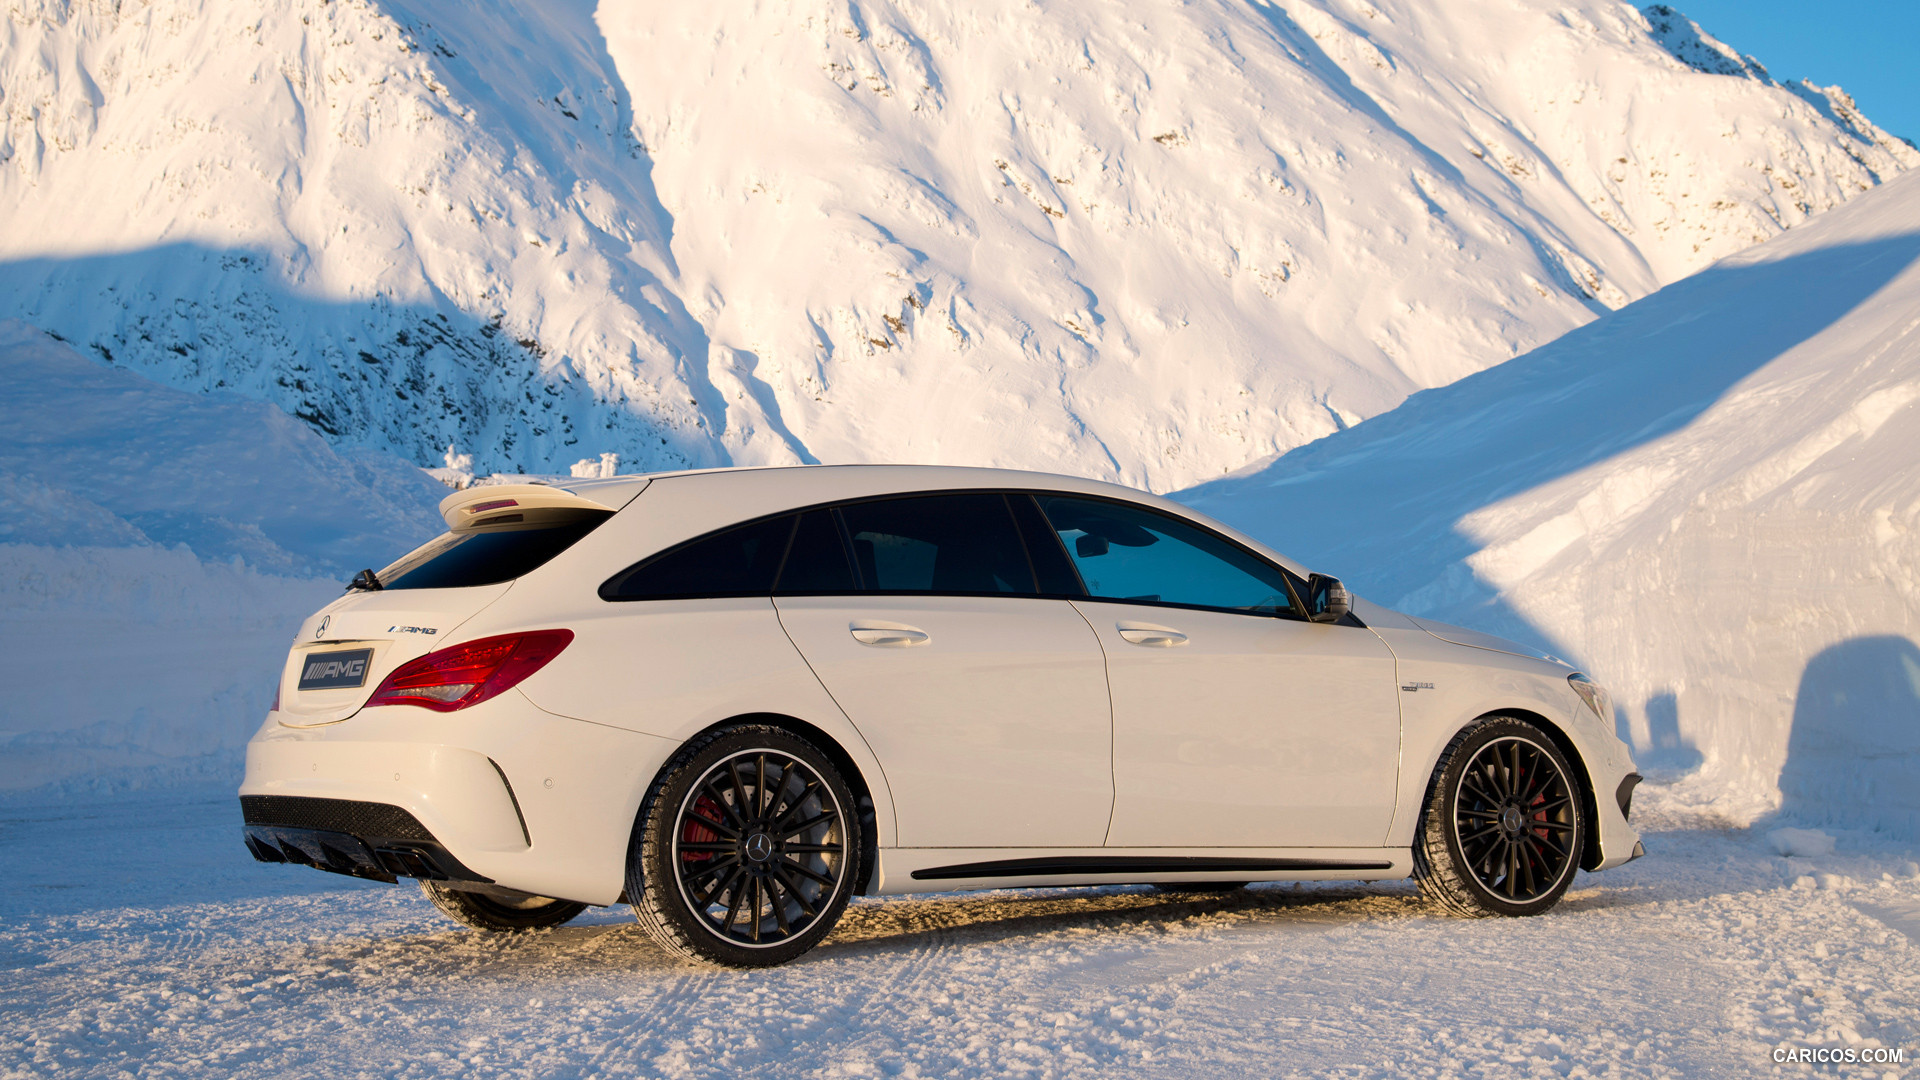 2015 Mercedes-Benz CLA 45 AMG Shooting Brake (Calcite White) - Side, #26 of 70